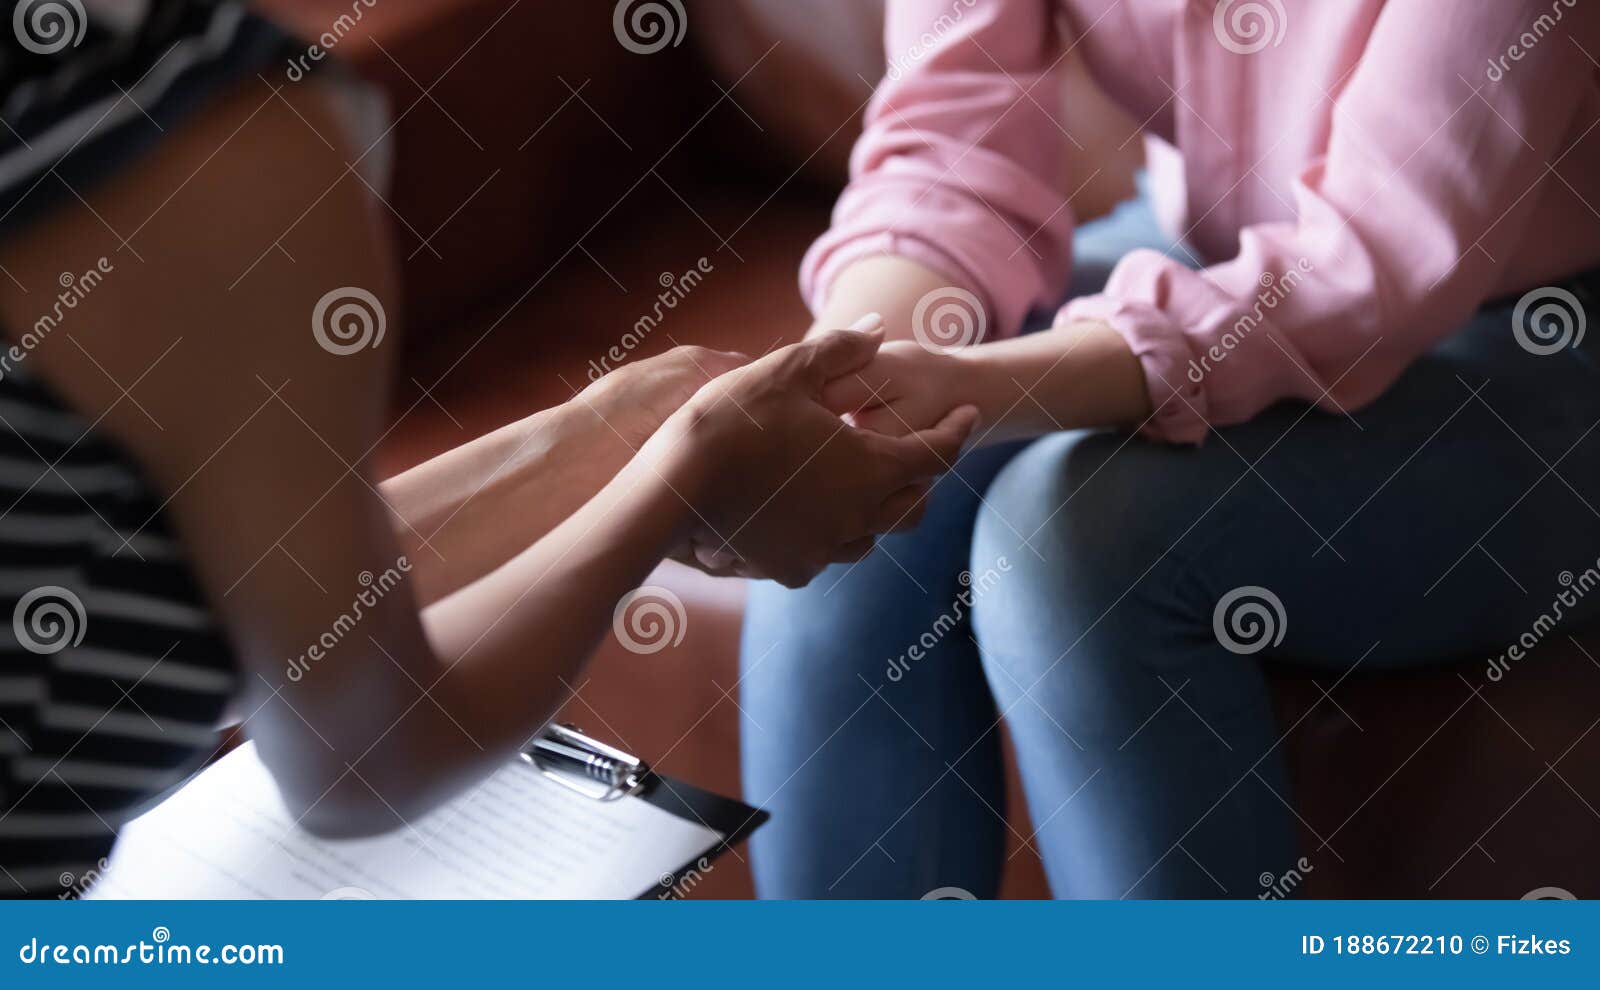 african psychologist holds hands of girl patient, closeup view